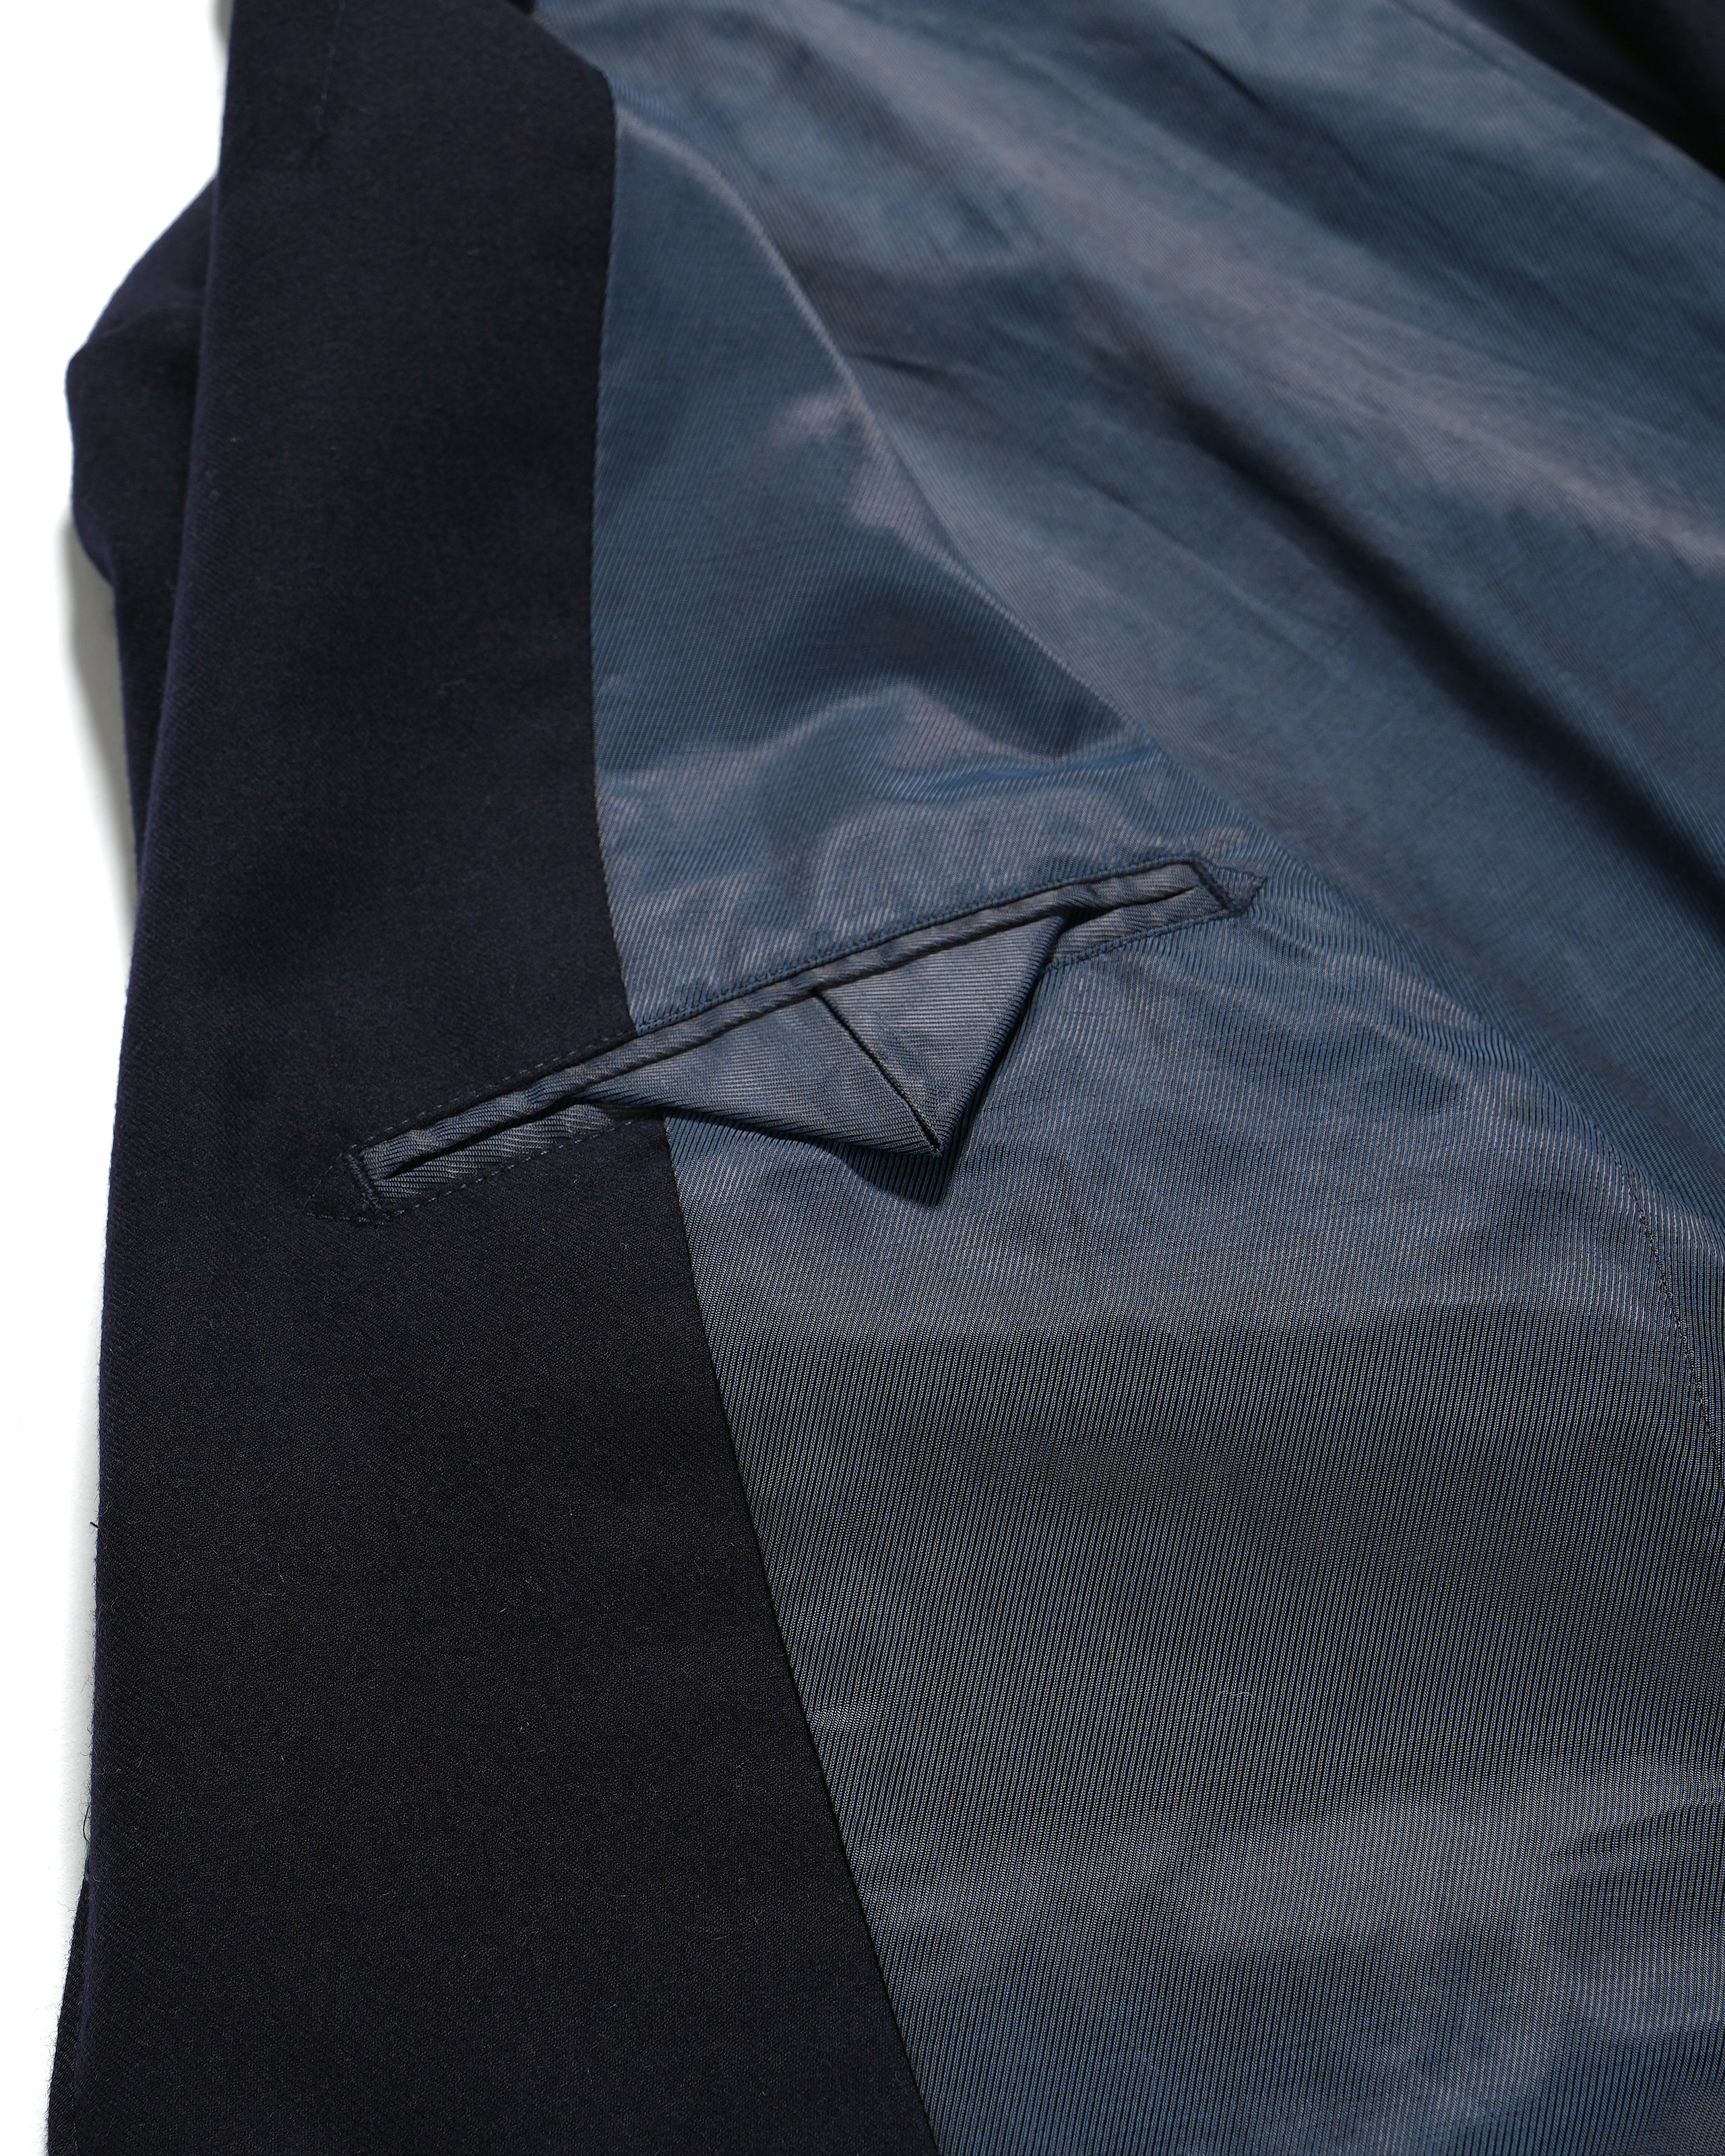 Andover Jacket - Navy Solid Poly Wool Flannel